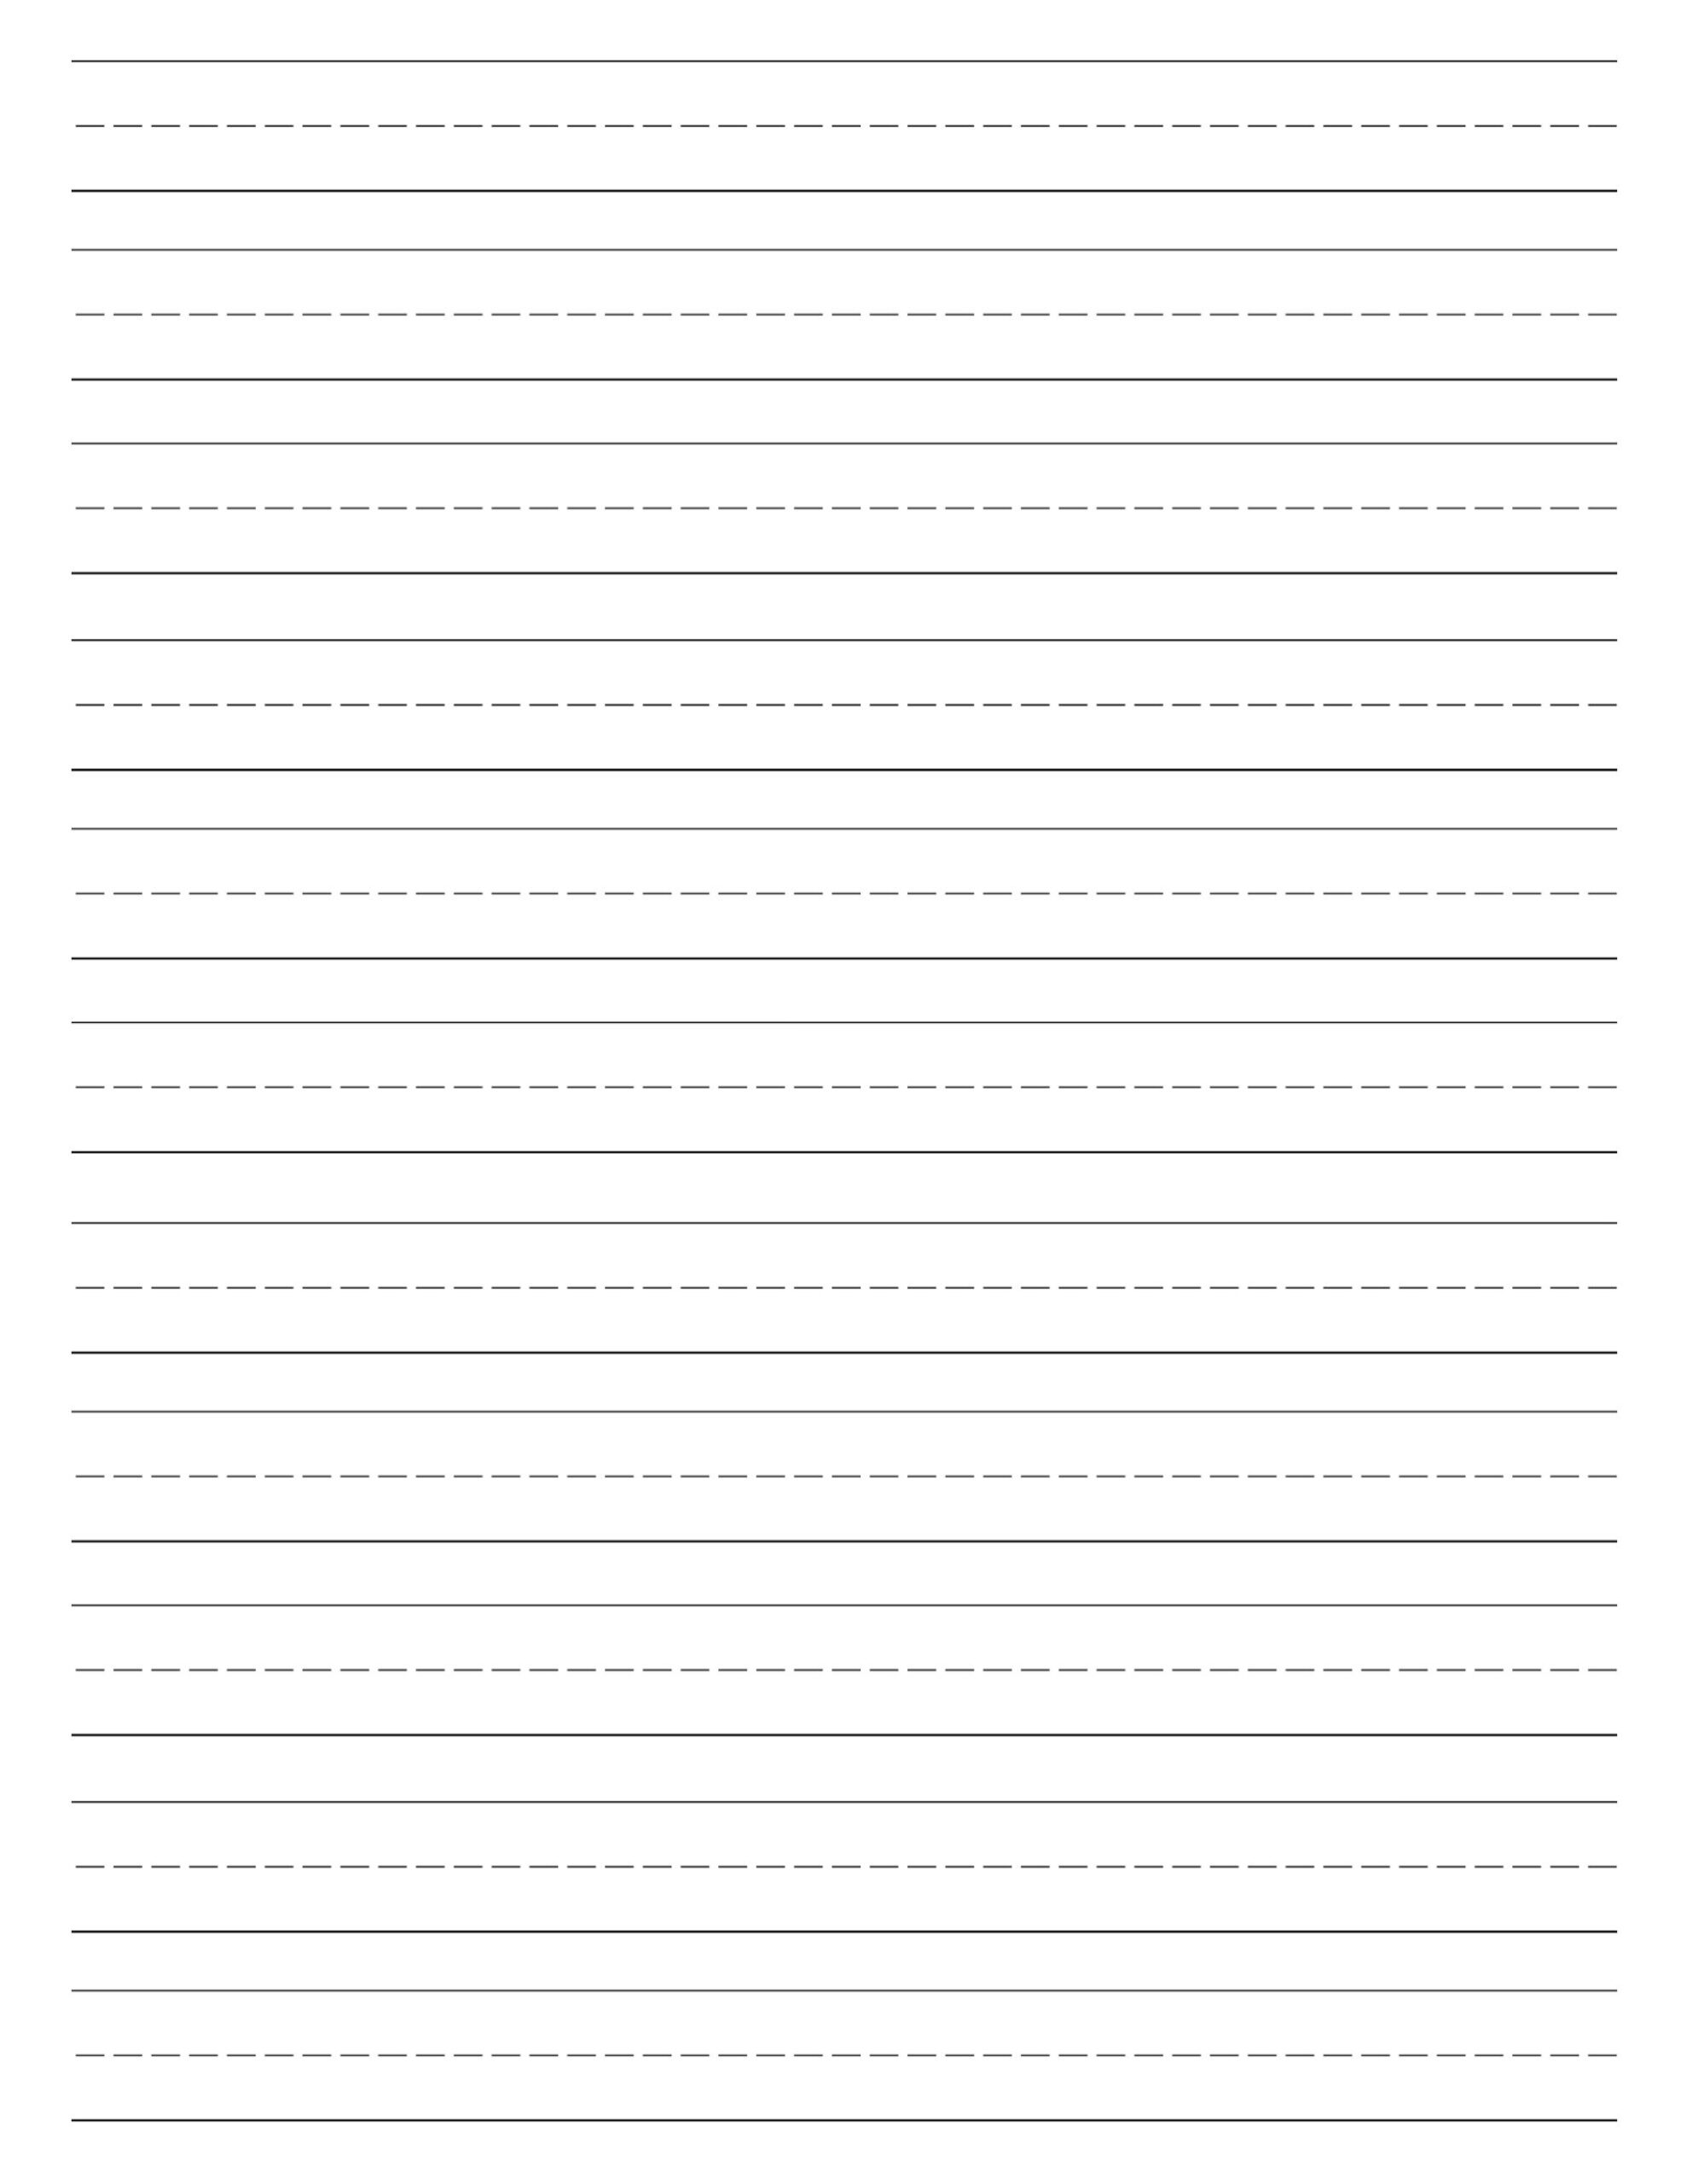 Lined Paper For Writing Free